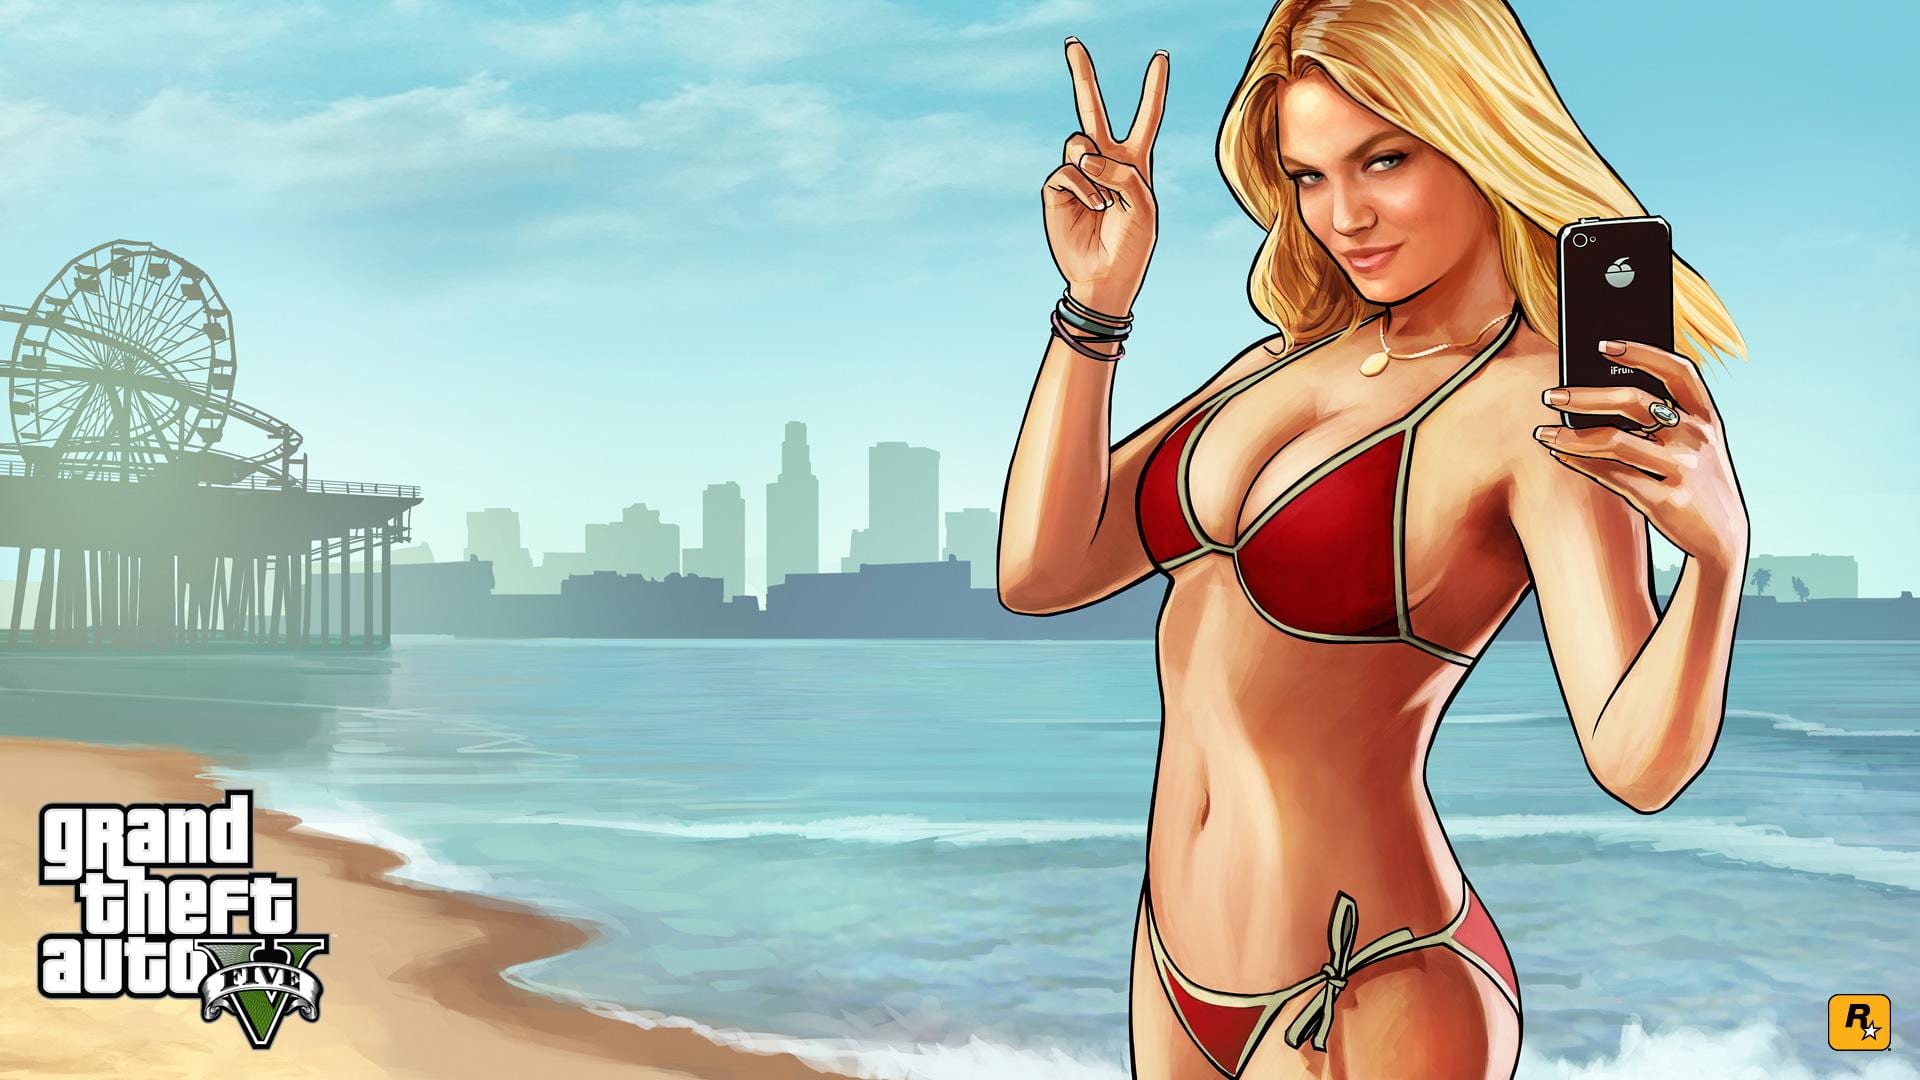 GTA V PS4 Update 1.38 is Out Now, Massive Patch Notes Available Inside